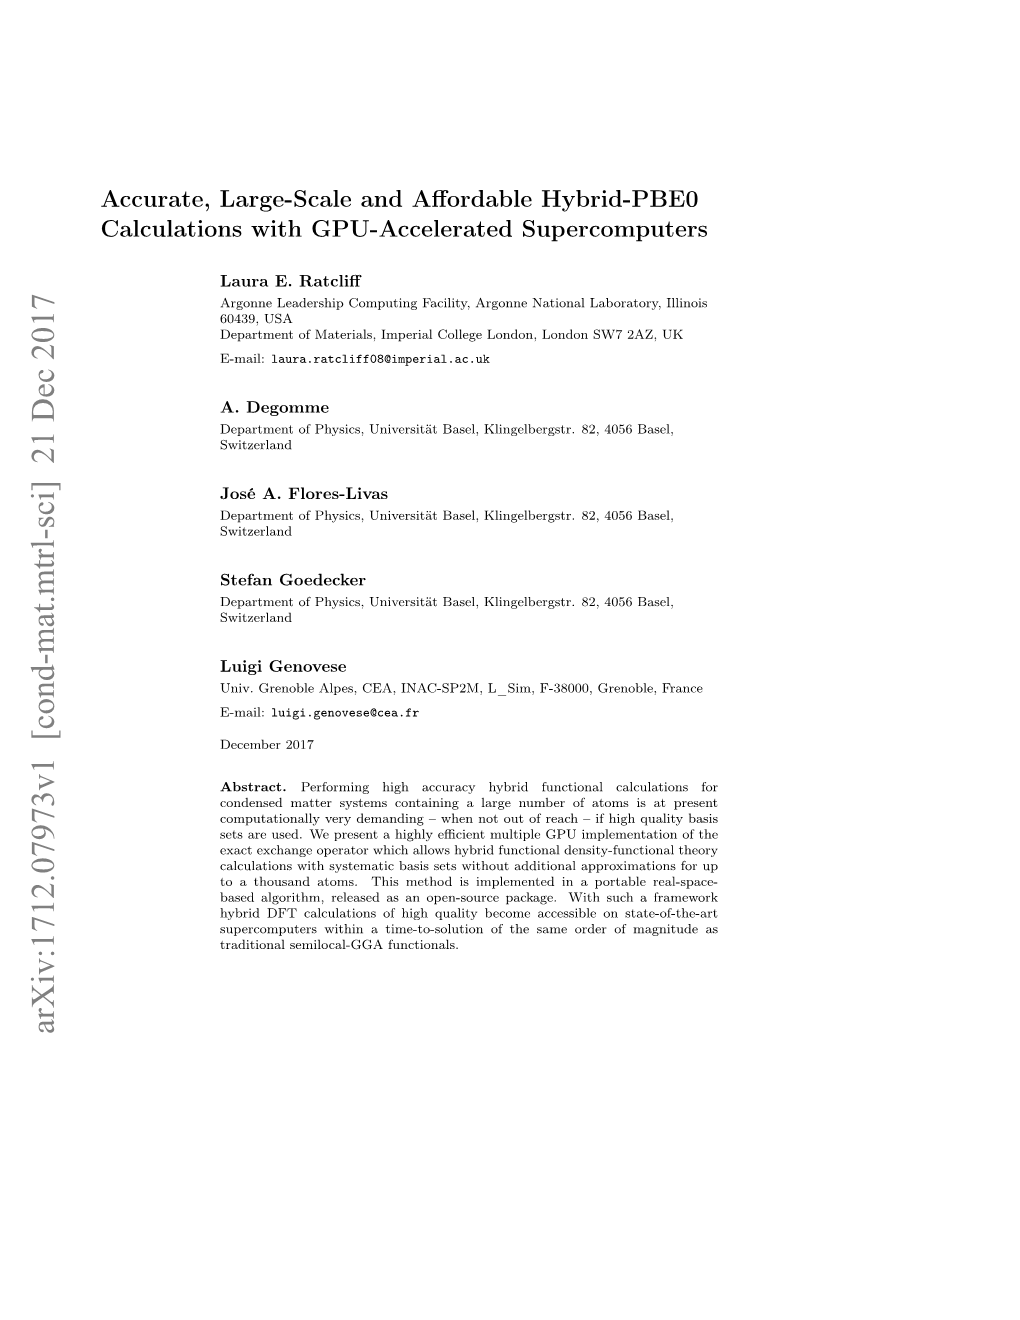 Accurate, Large-Scale and Affordable Hybrid-PBE0 Calculations With